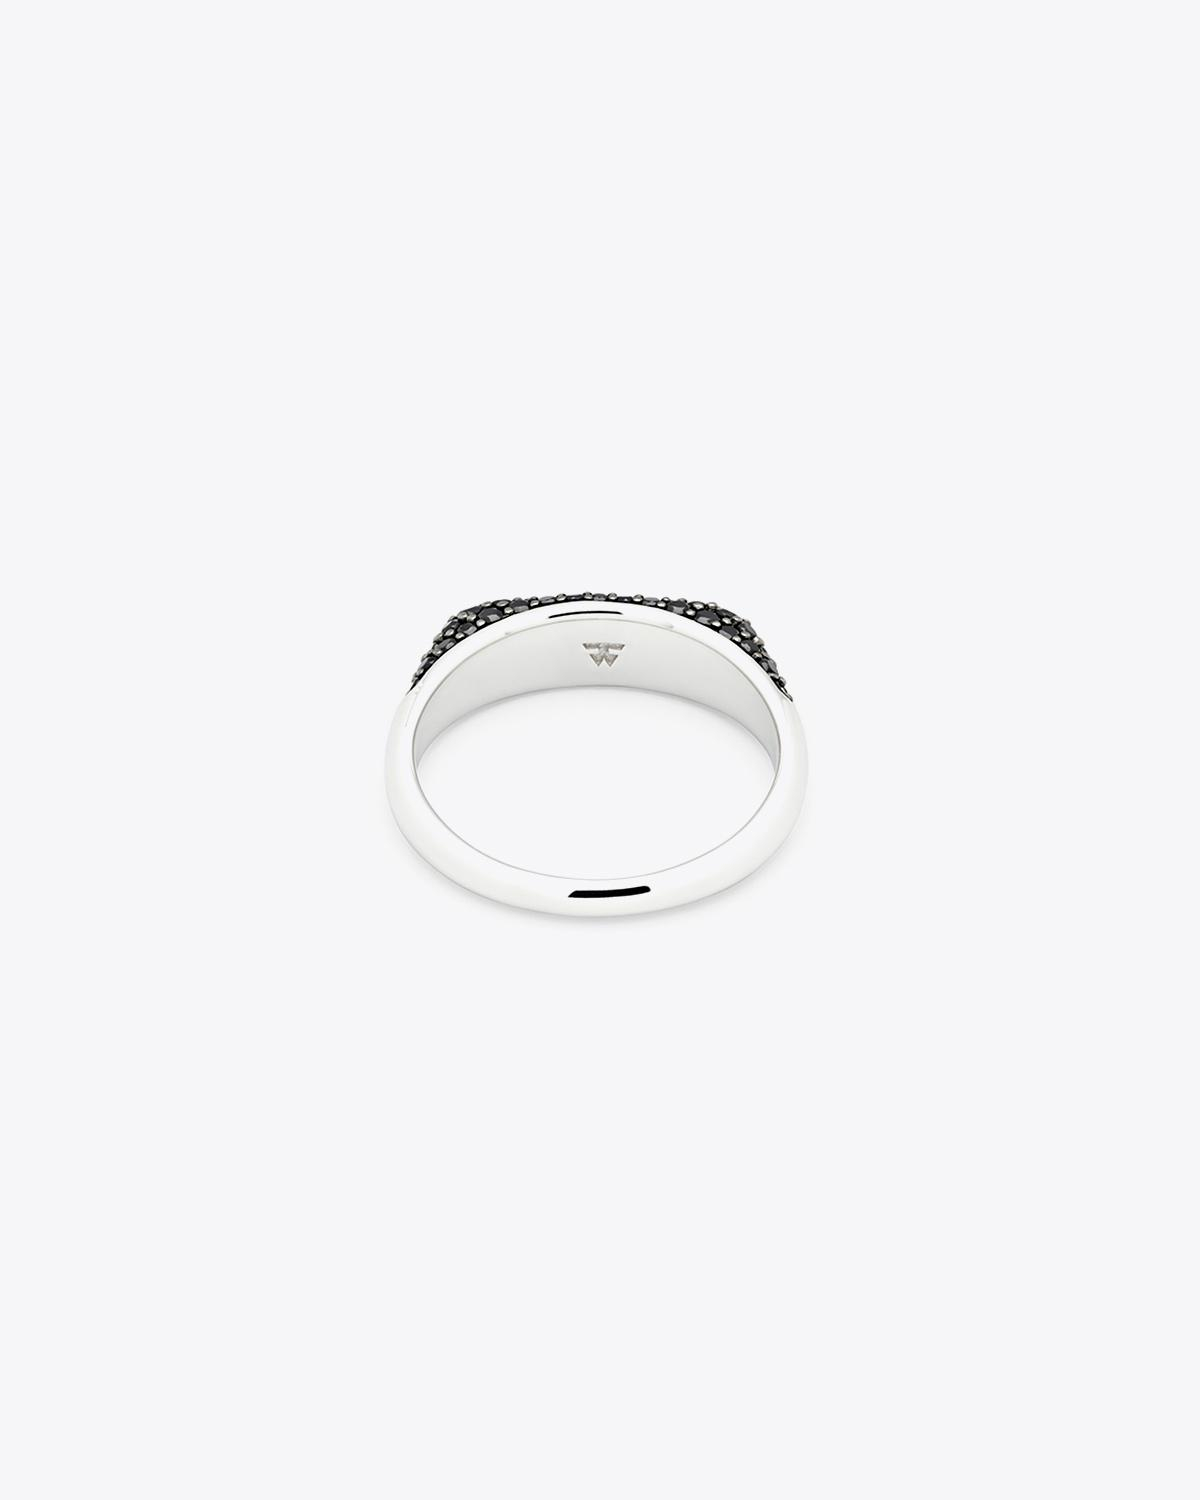 Tom Wood Knut Ring Black Spinel - Silver  